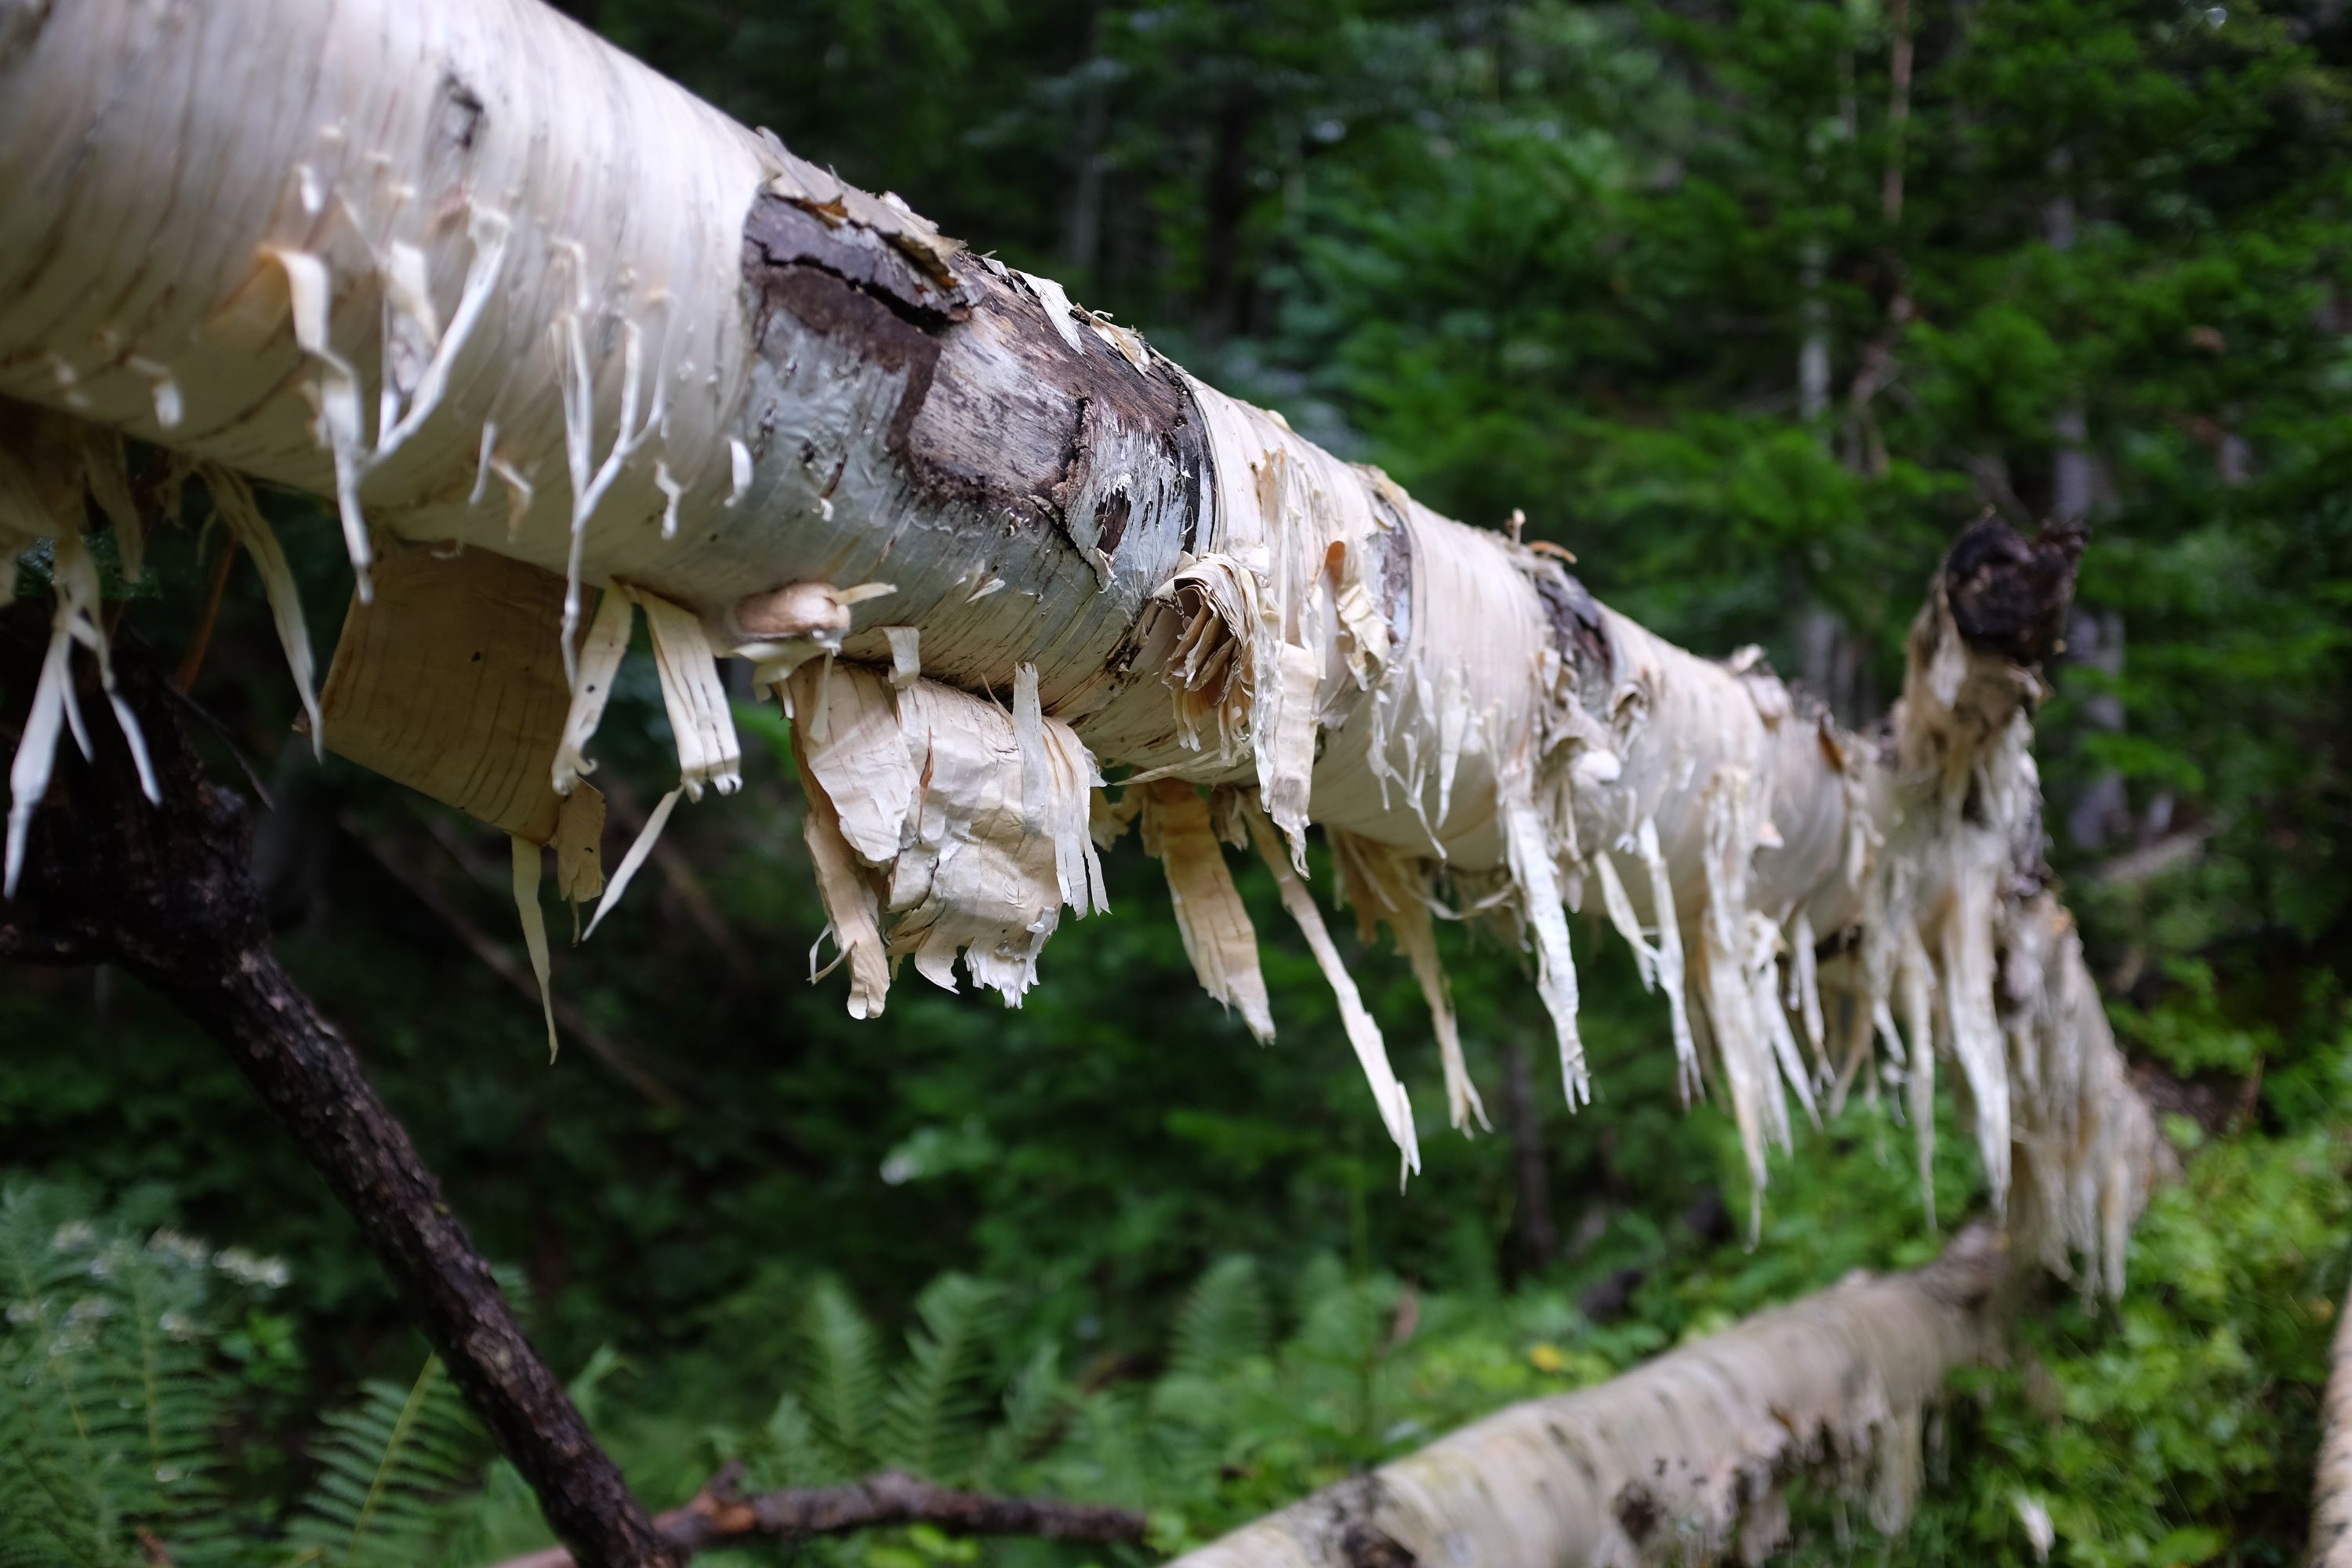 The white trunk of a birch with its bark peeling heavily.